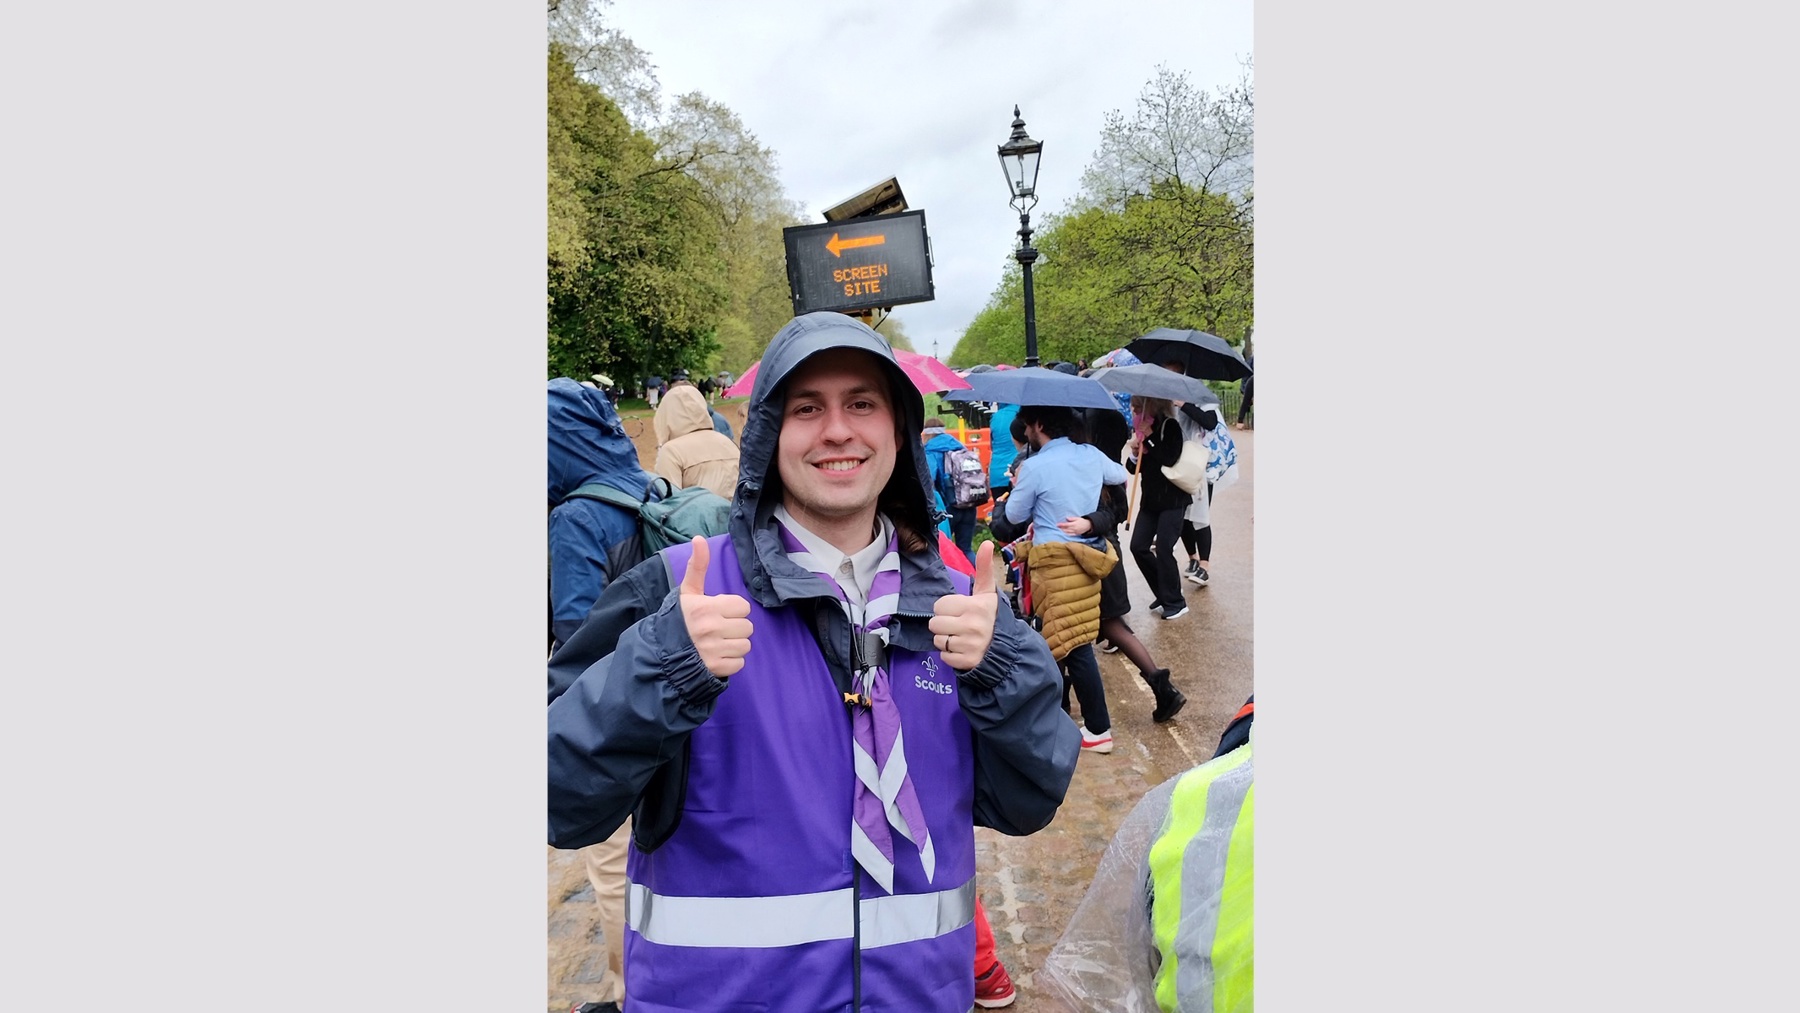 Luke's holding his thumbs up to the camera and smiling. He's got a purple hi-vis vest on with the Scouts logo in white, along with a purple and white necker. He's wearing a rain jacket with his hood up, and he's outside near some trees. There are people behind him holding umbrellas up and wearing rain jackets too.